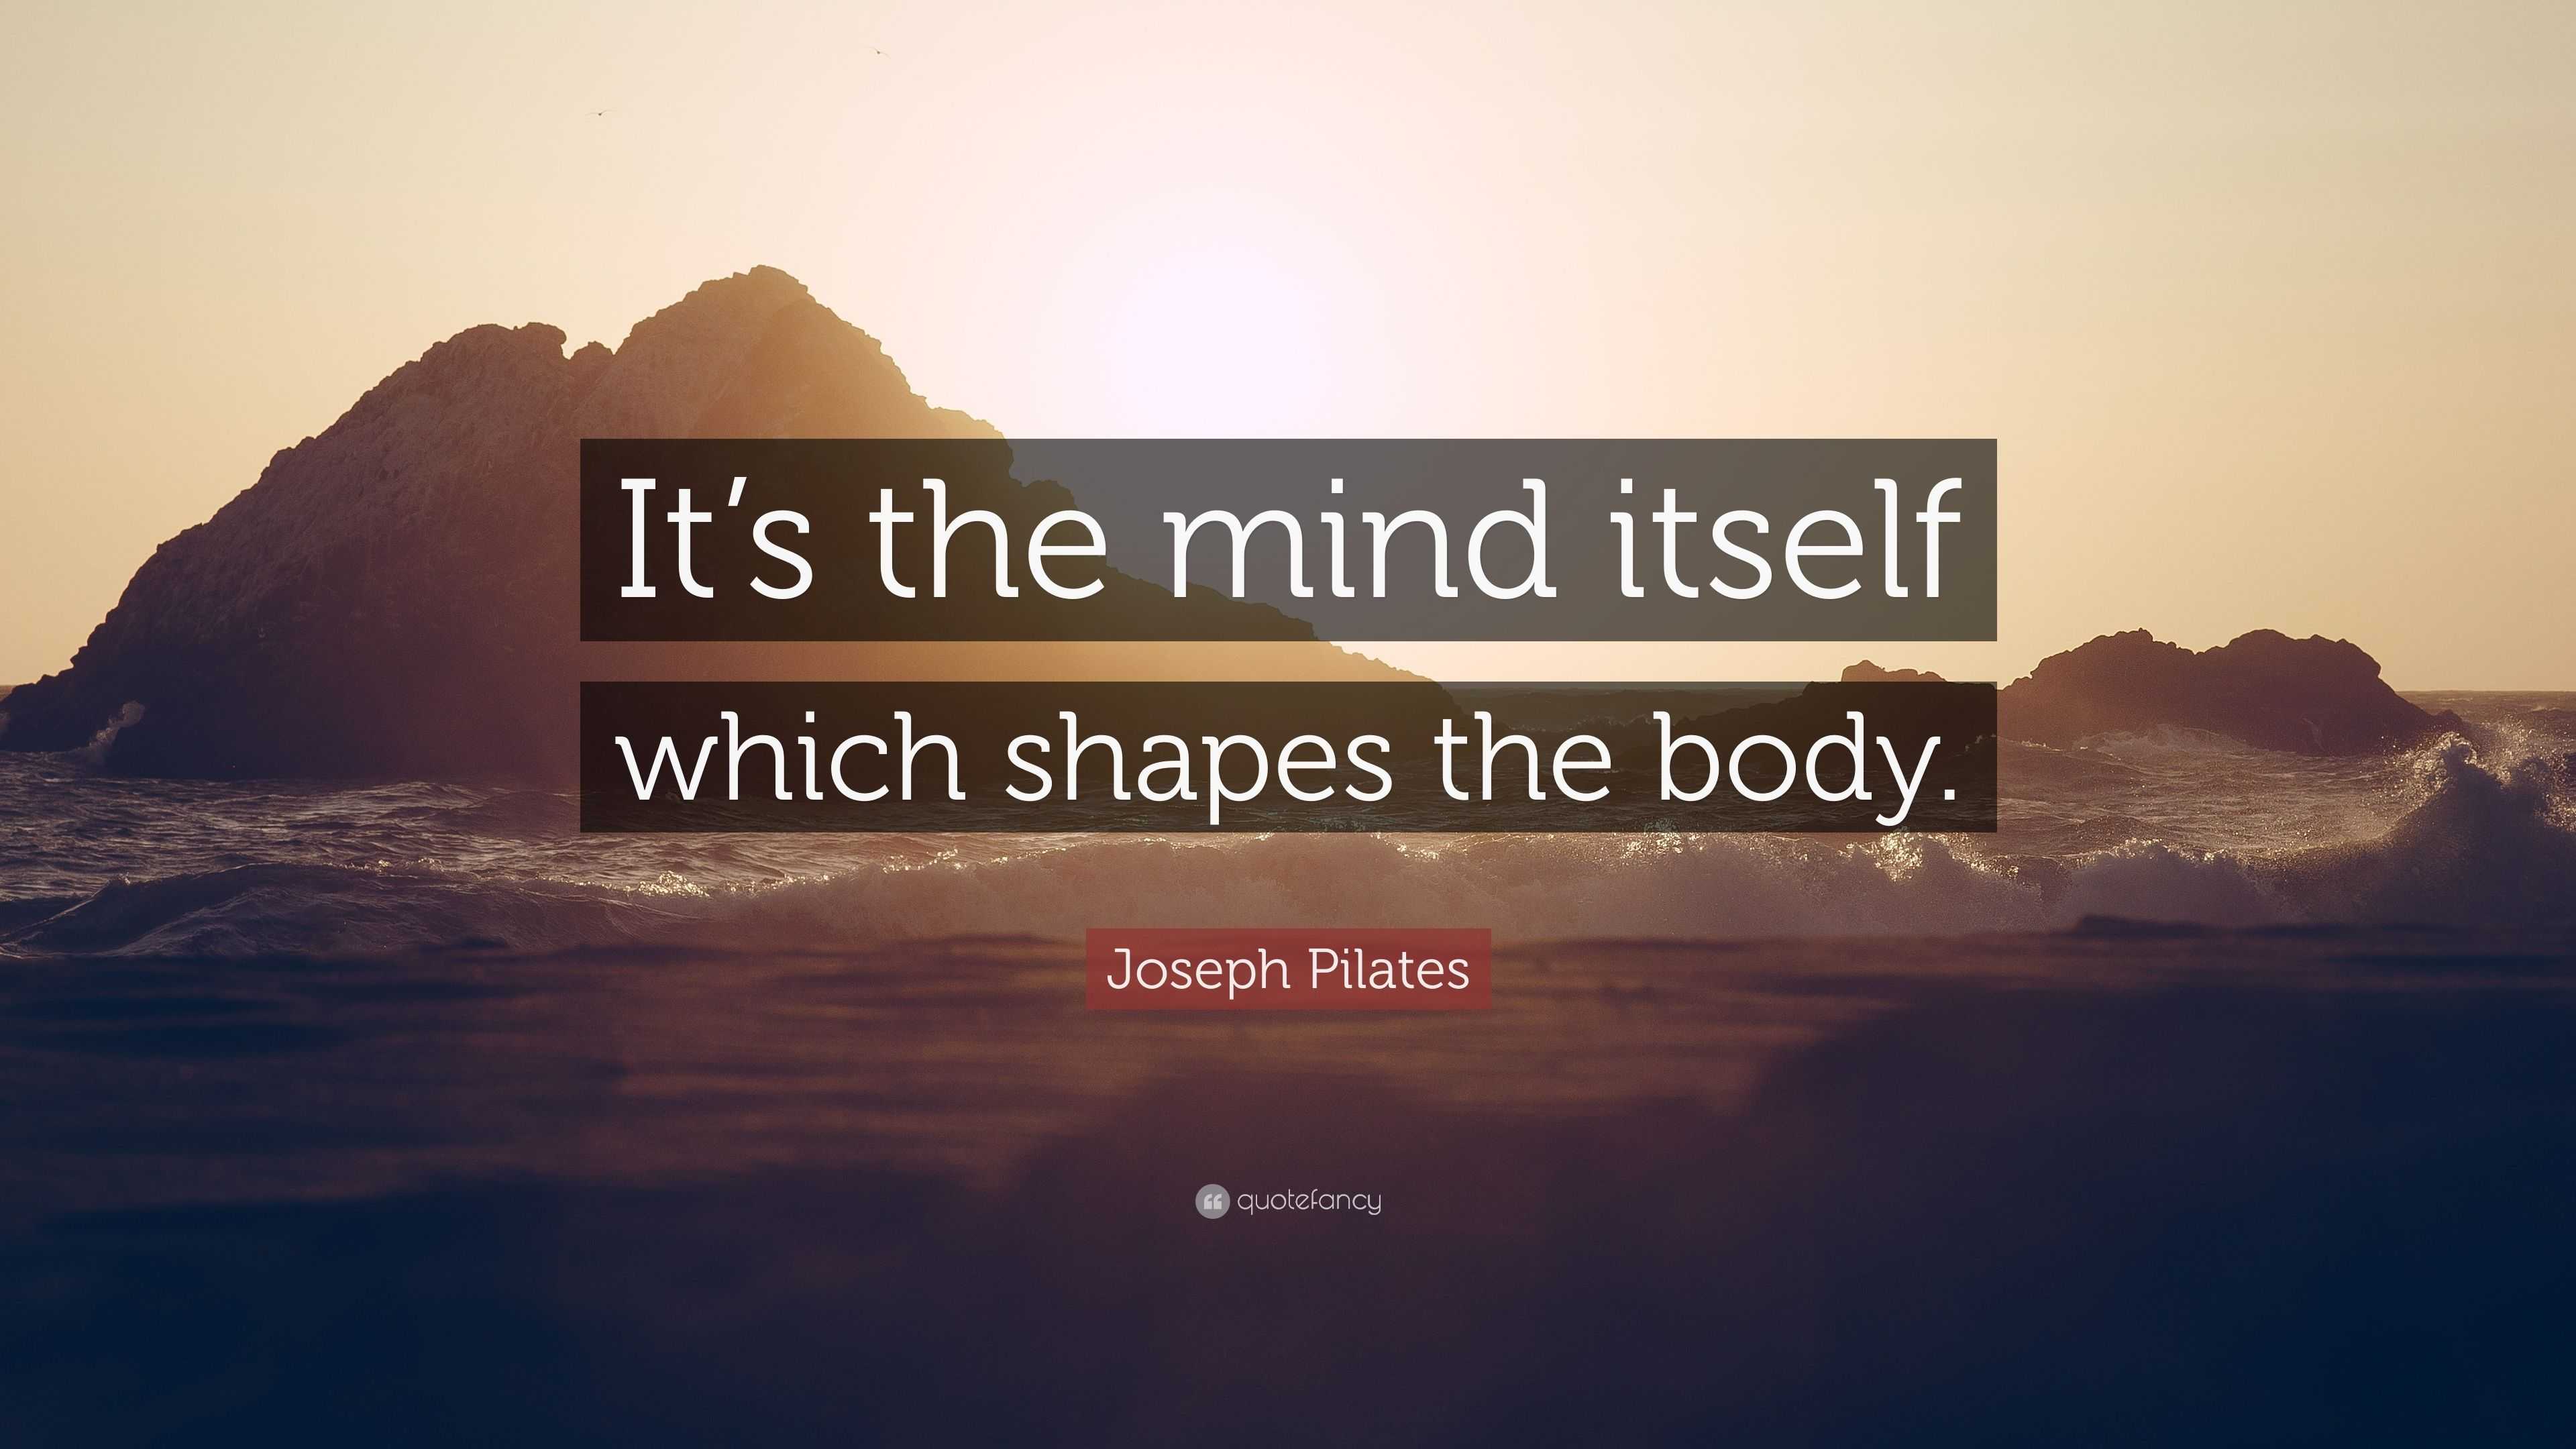 Joseph Pilates Quote: “It's the mind itself which shapes the body.”